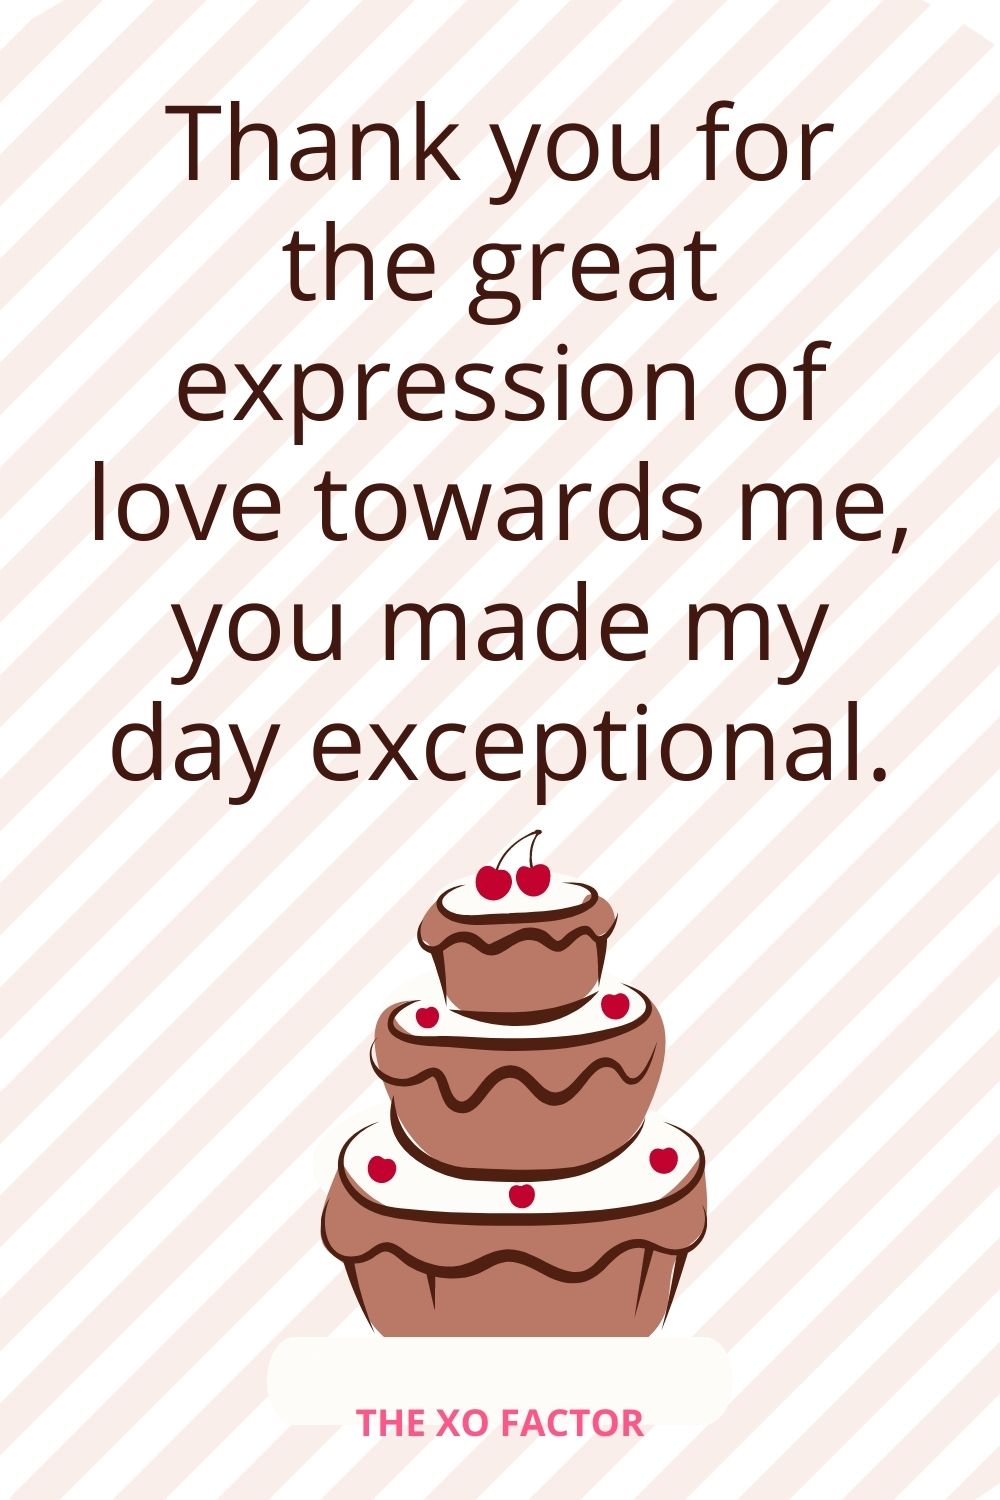 Thank you for the great expression of love towards me, you made my day exceptional.